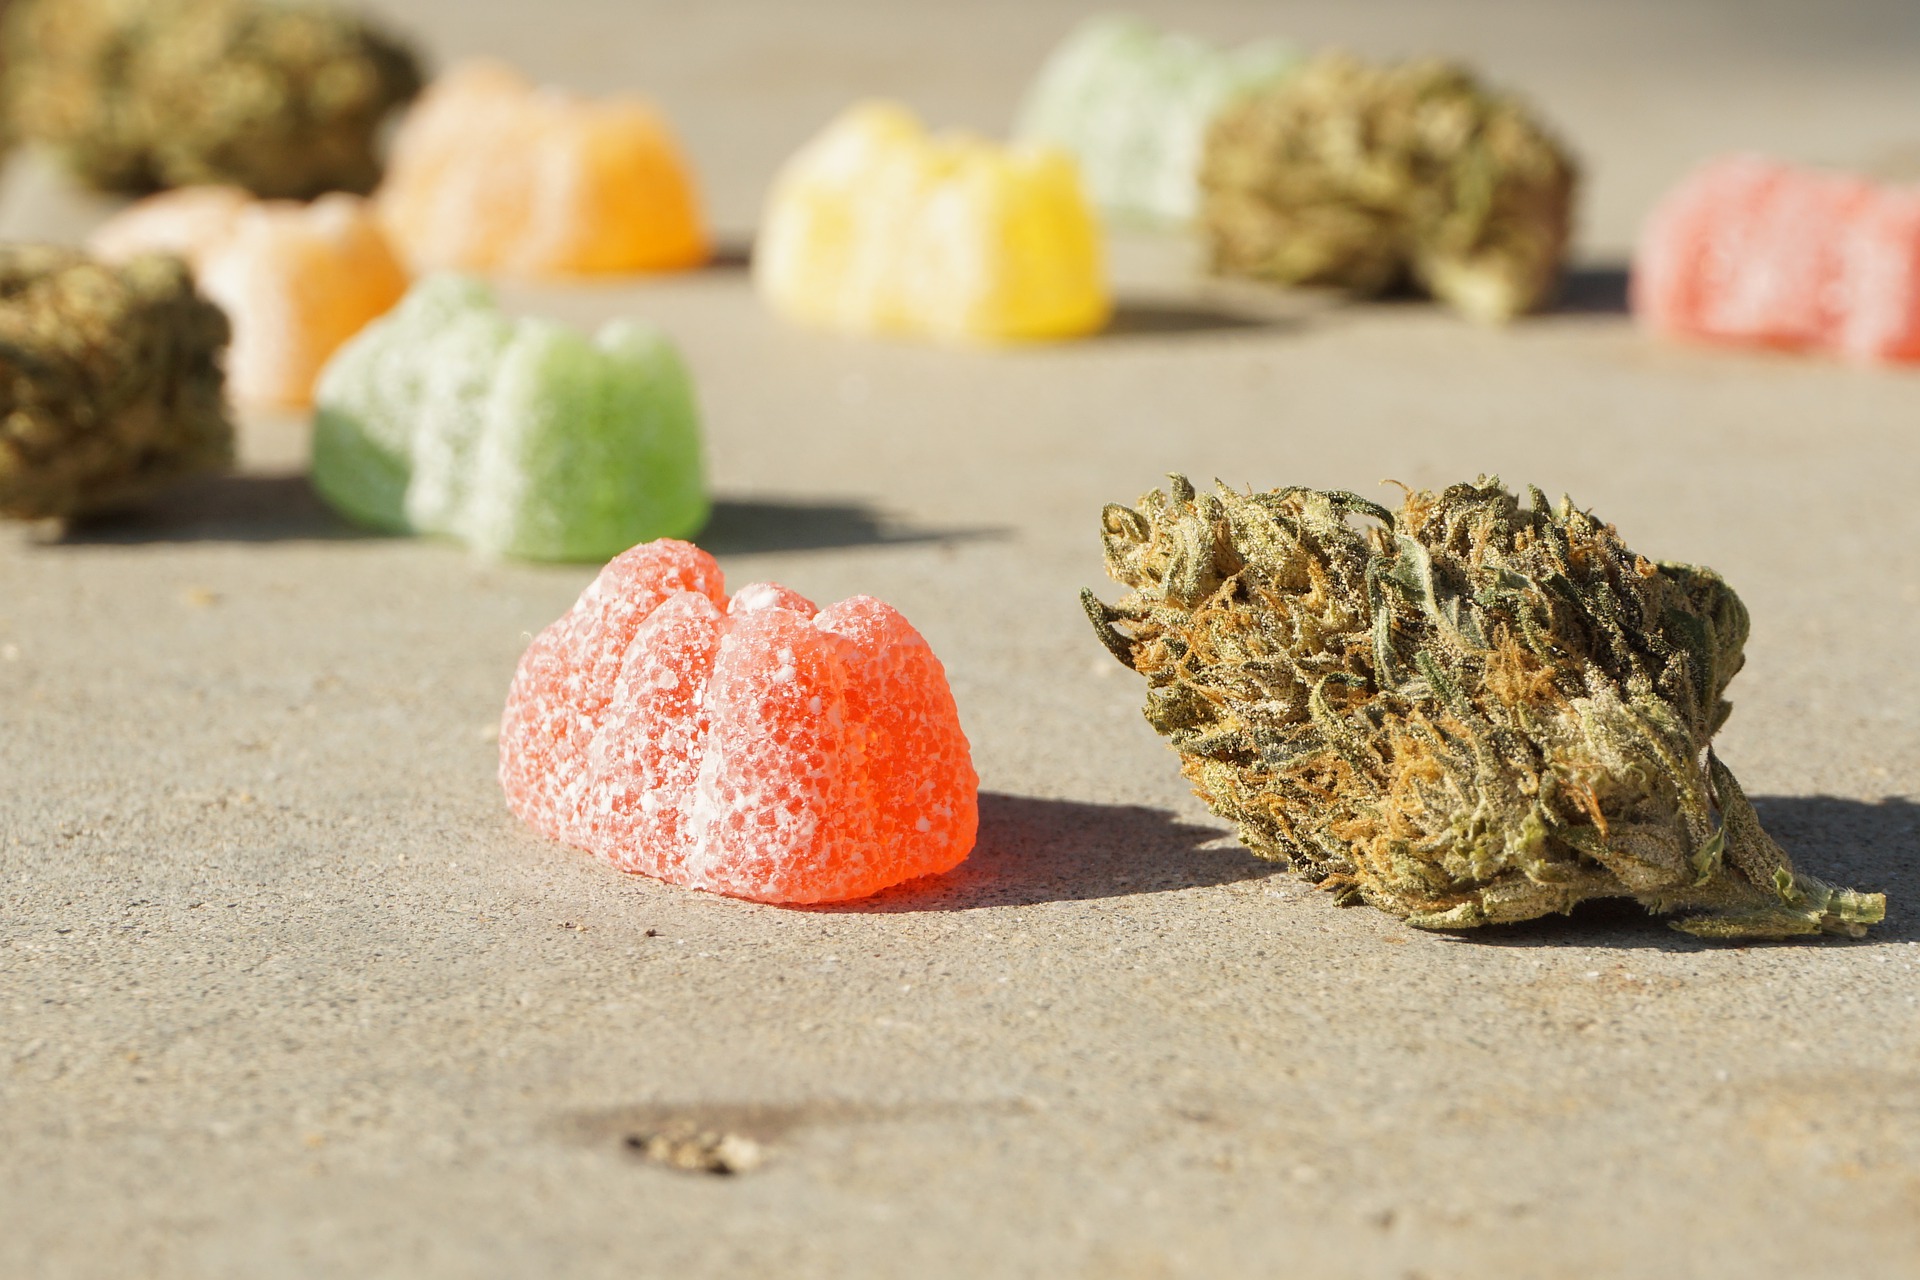 Difference between Sativa Edibles and Indica Edibles (2022 Edition)